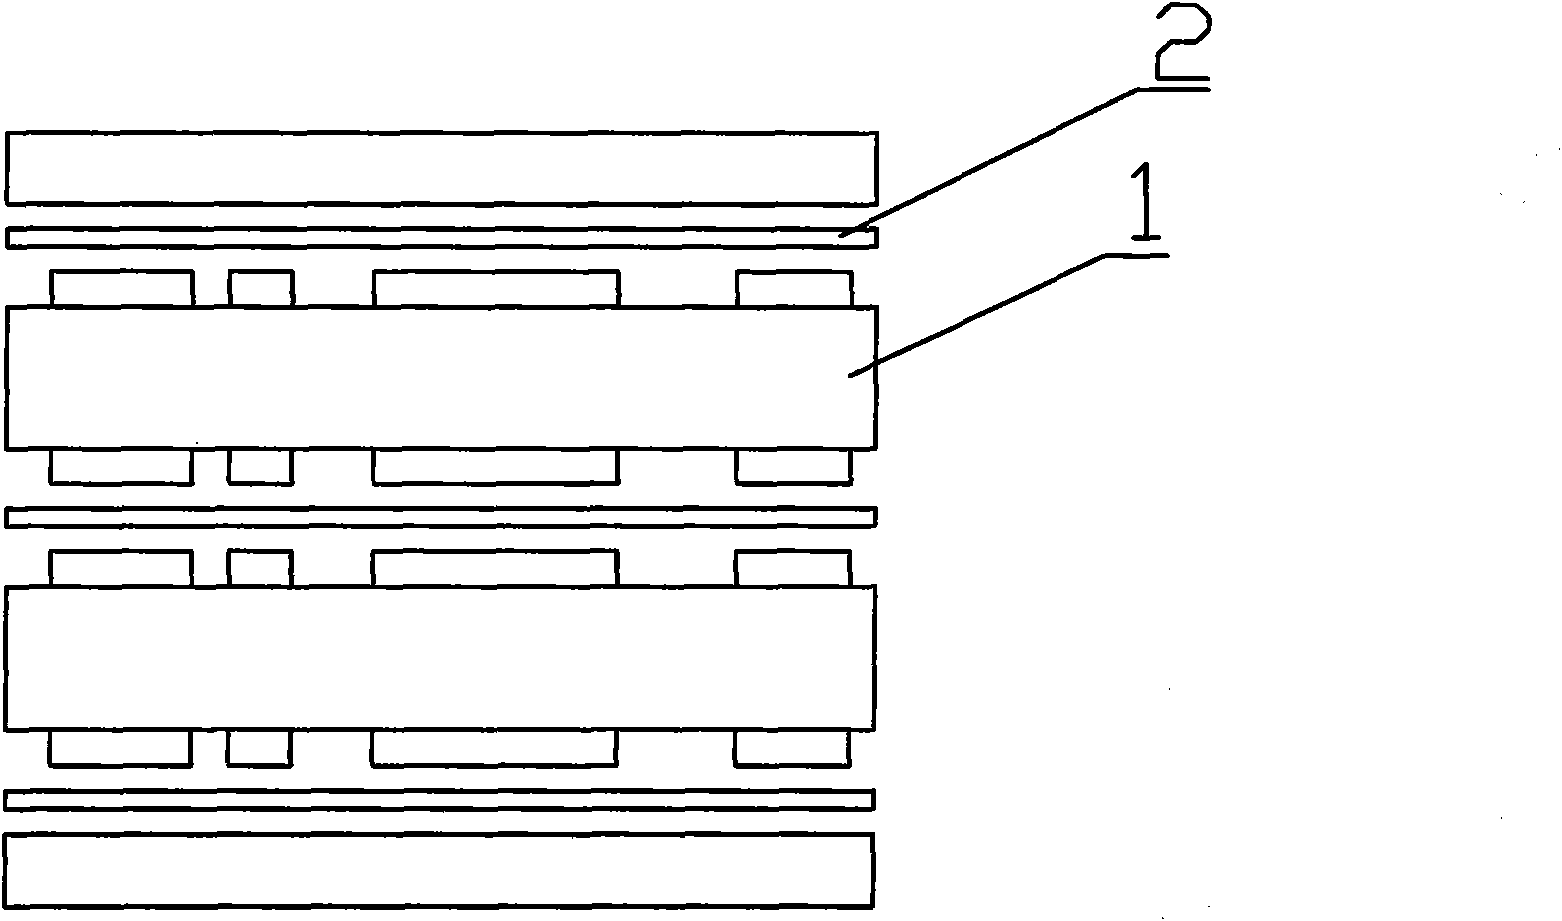 Internal board structure for printed circuit board